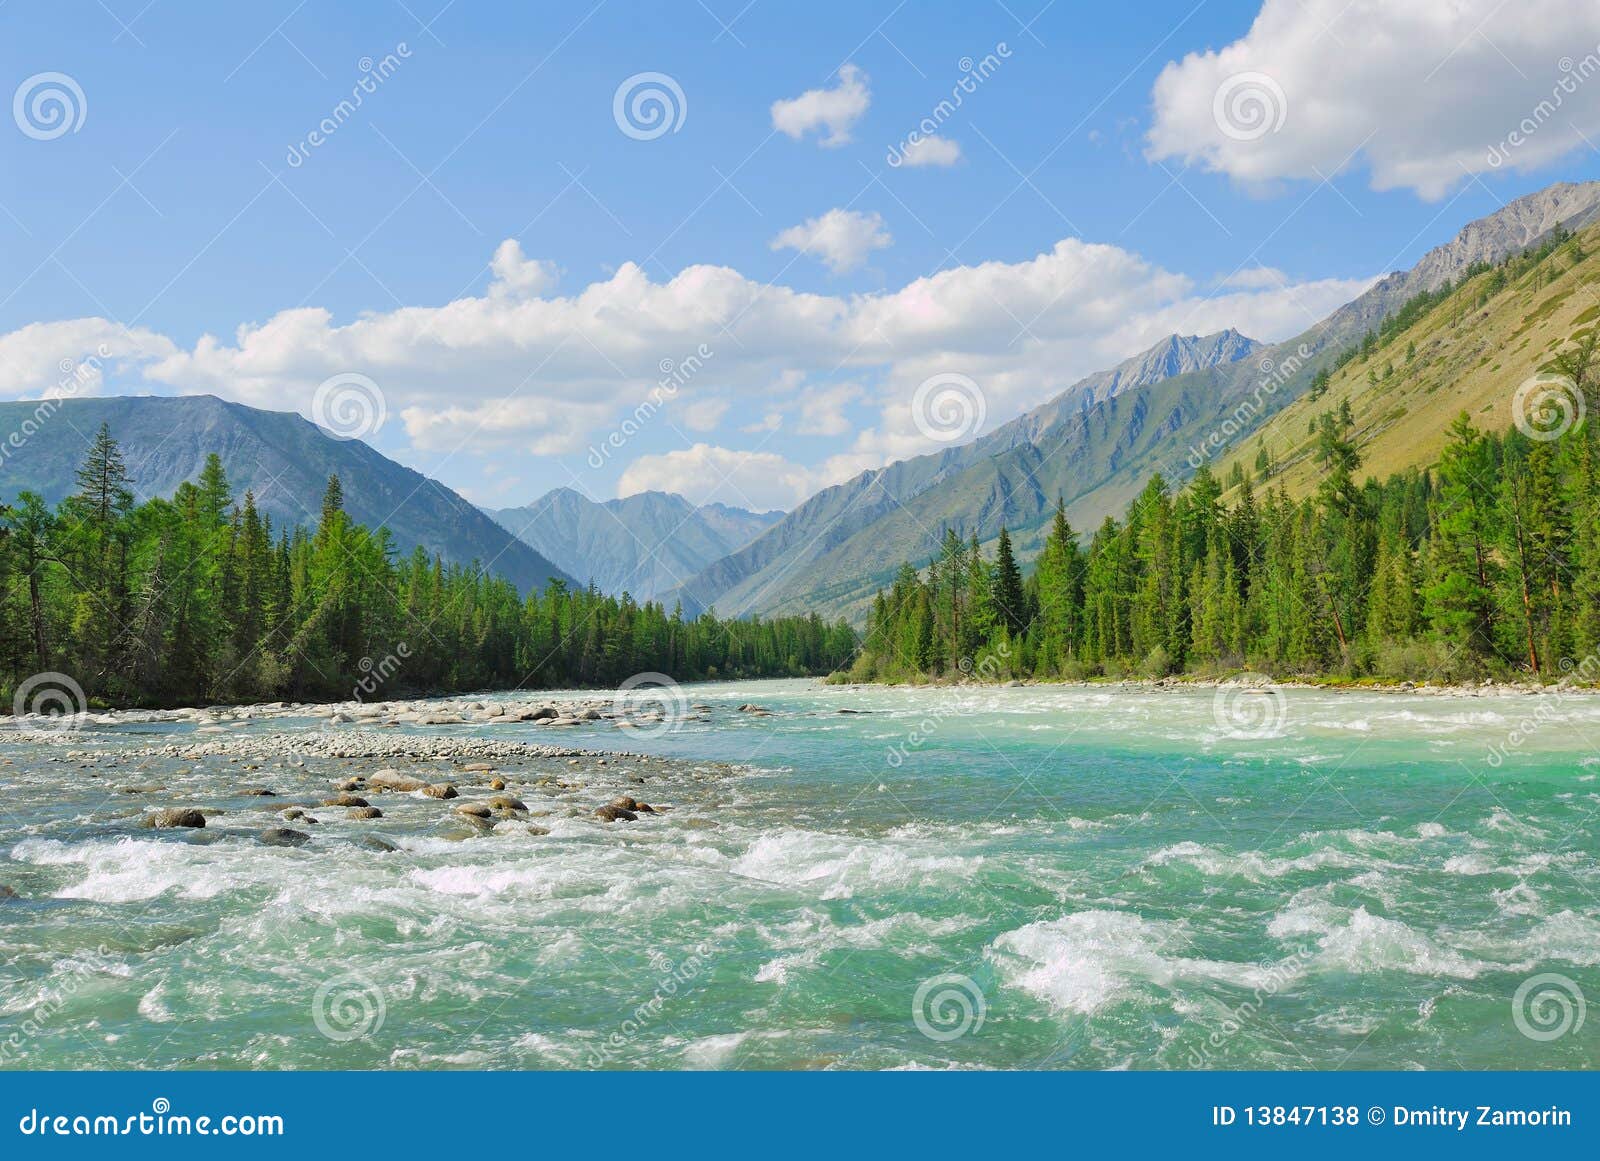 siberia. altai. view on green valley